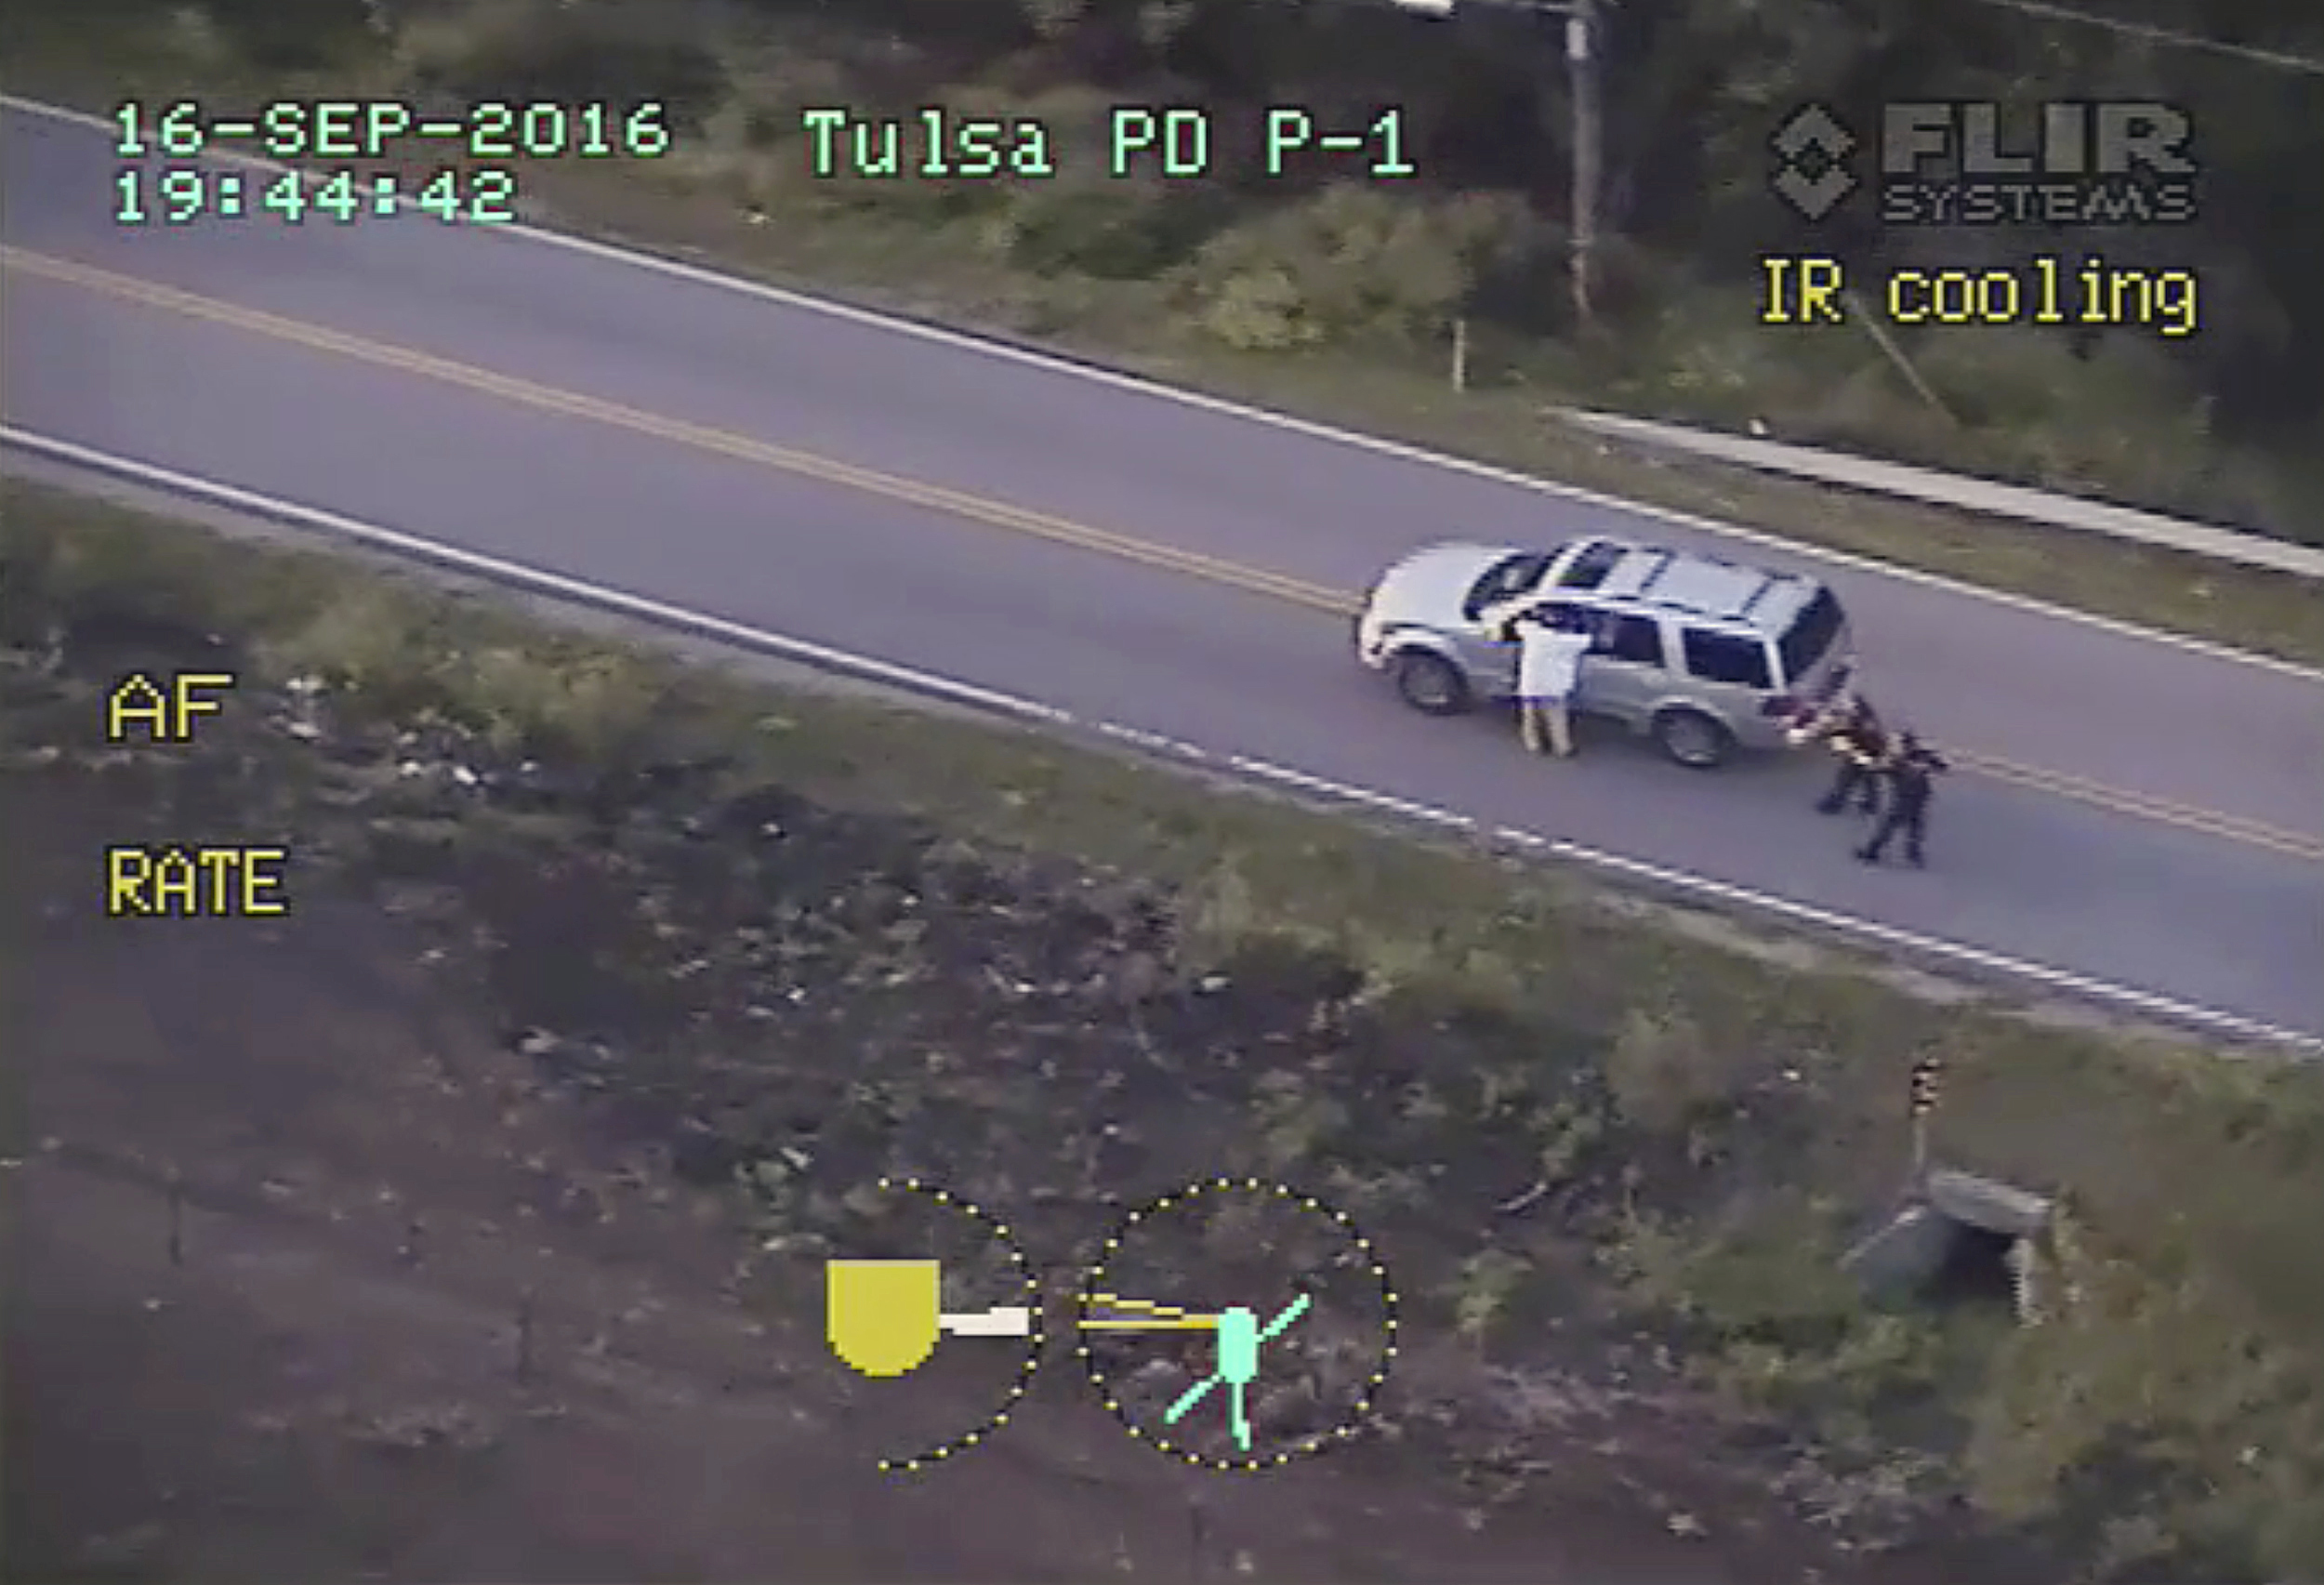 PHOTO: In this Sept. 16, 2016 image made from video provided by police, Terence Crutcher, left, with his arms held up, is pursued by police officers as he walks next to his stalled SUV before he was shot and killed by one of the officers in Tulsa, Okla.